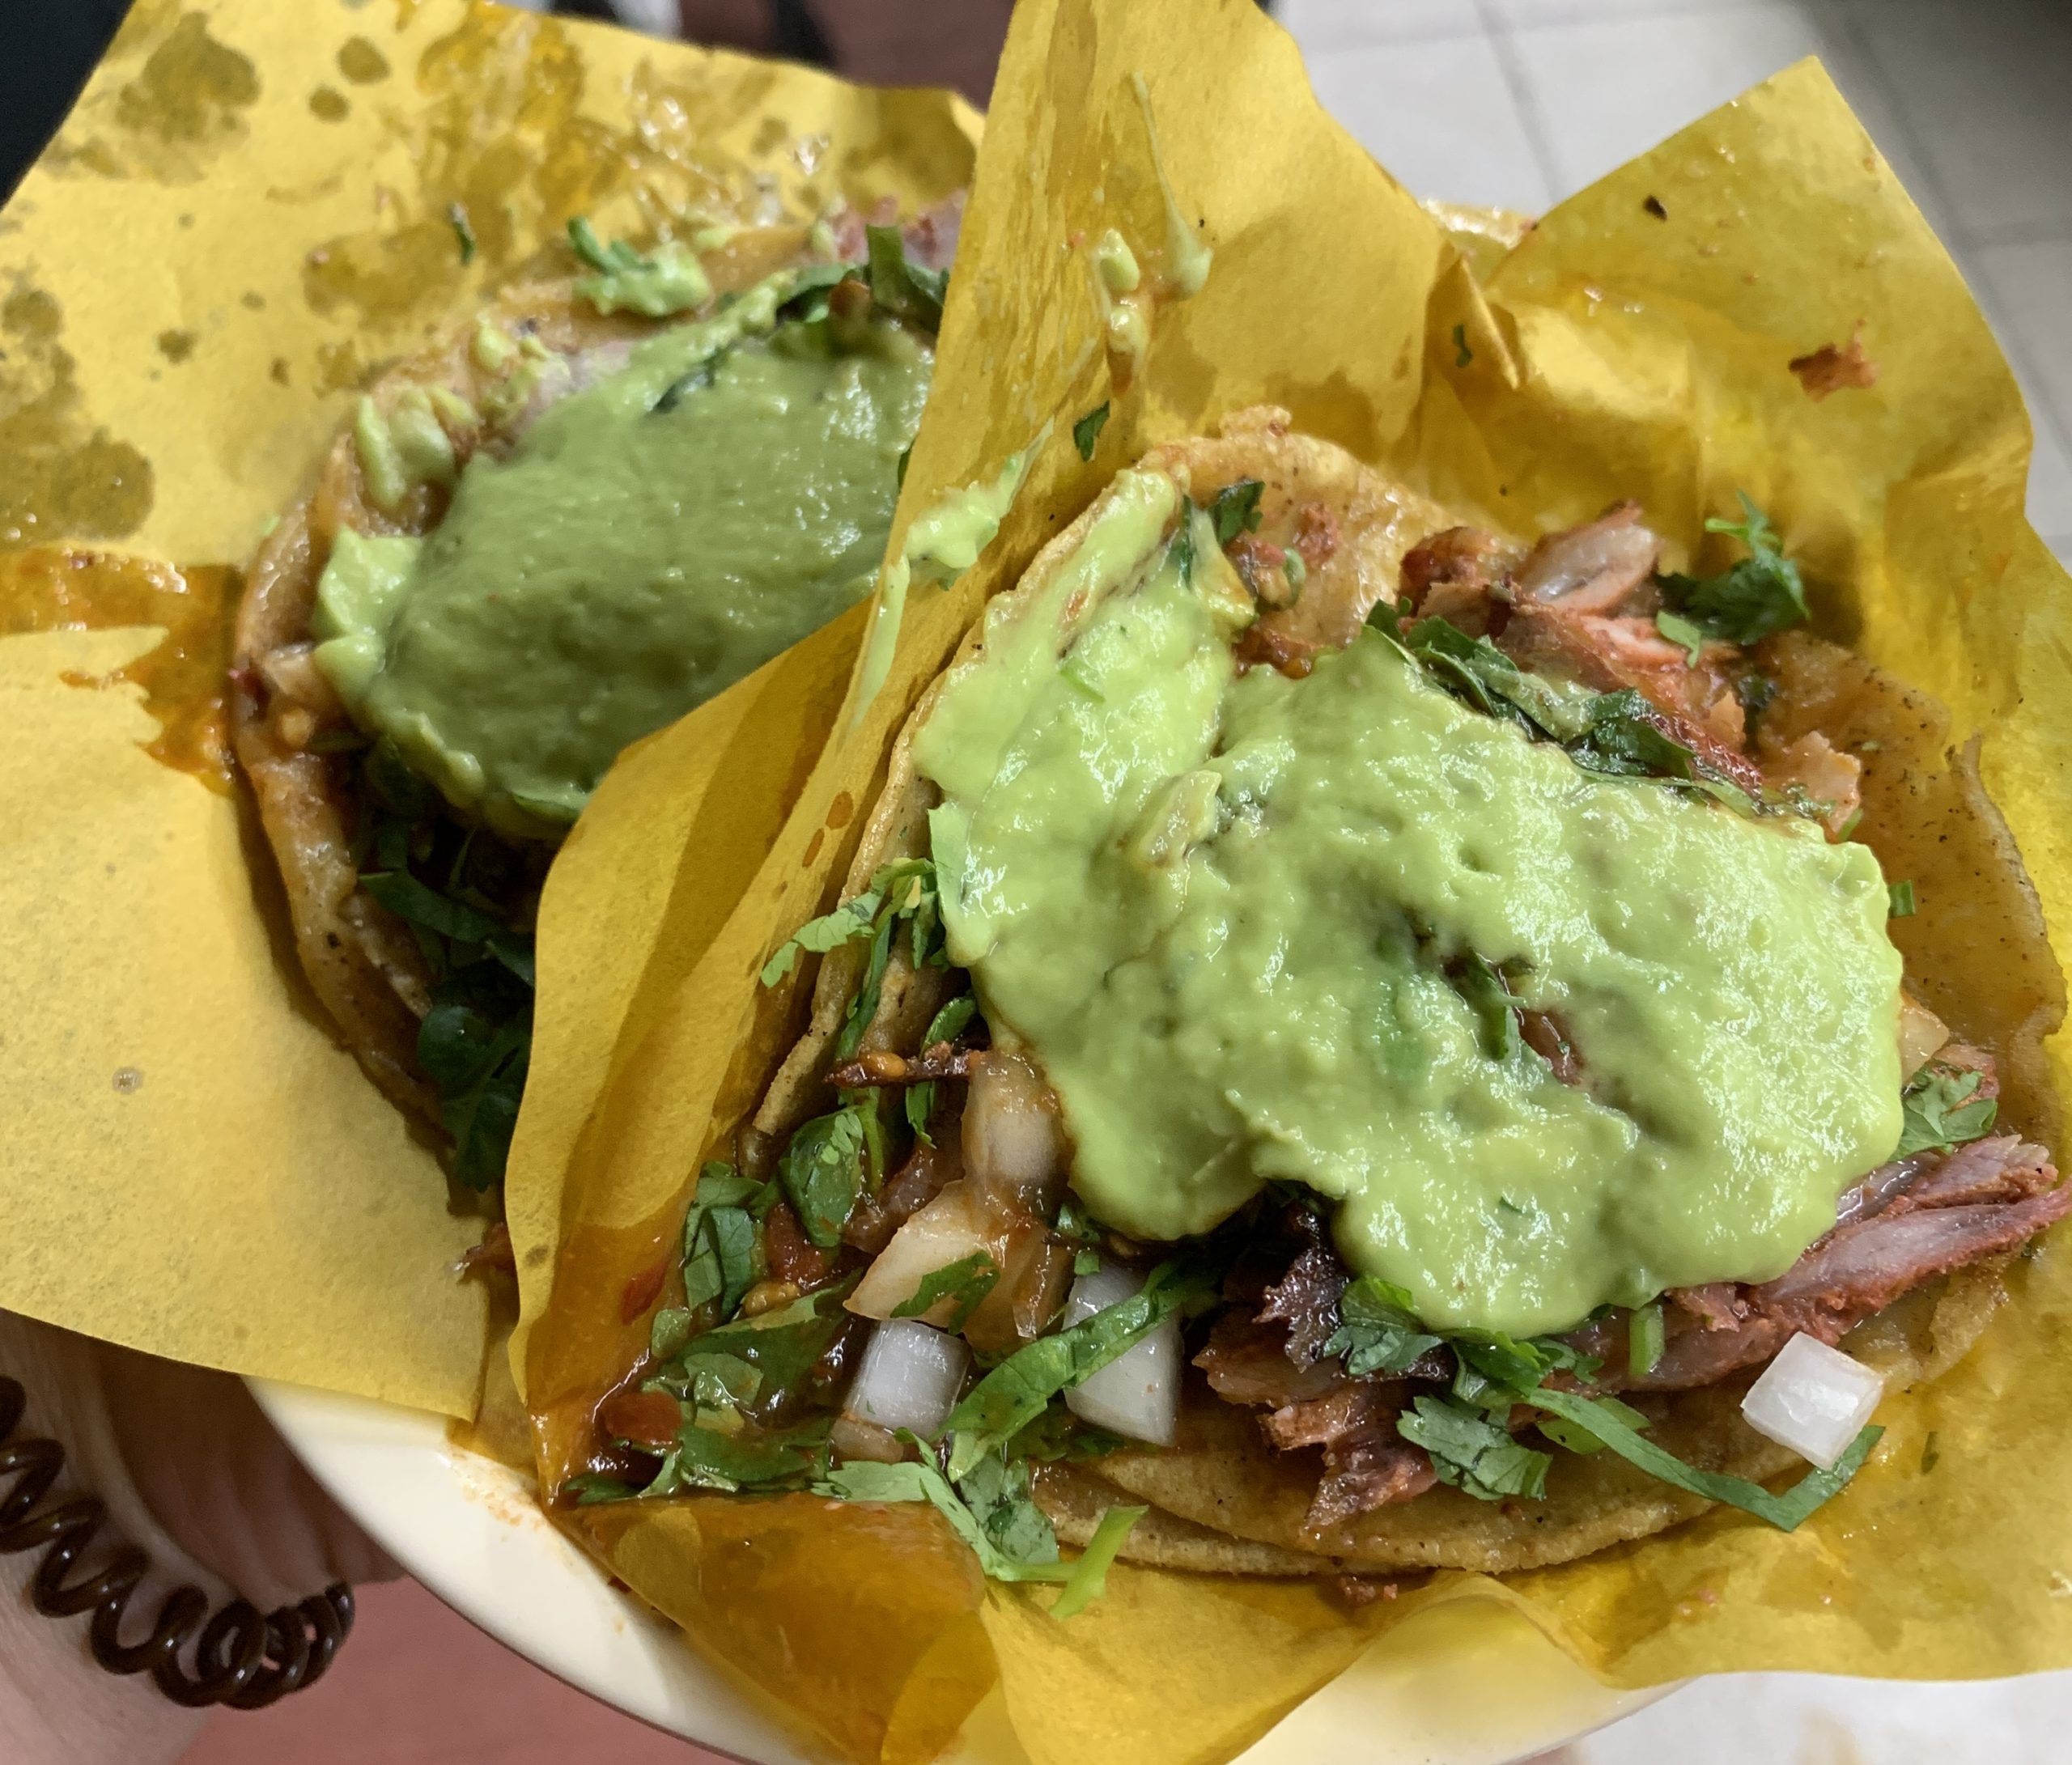 Iconic Tijuana taqueria Tacos El Franc's first US location will be in National City.